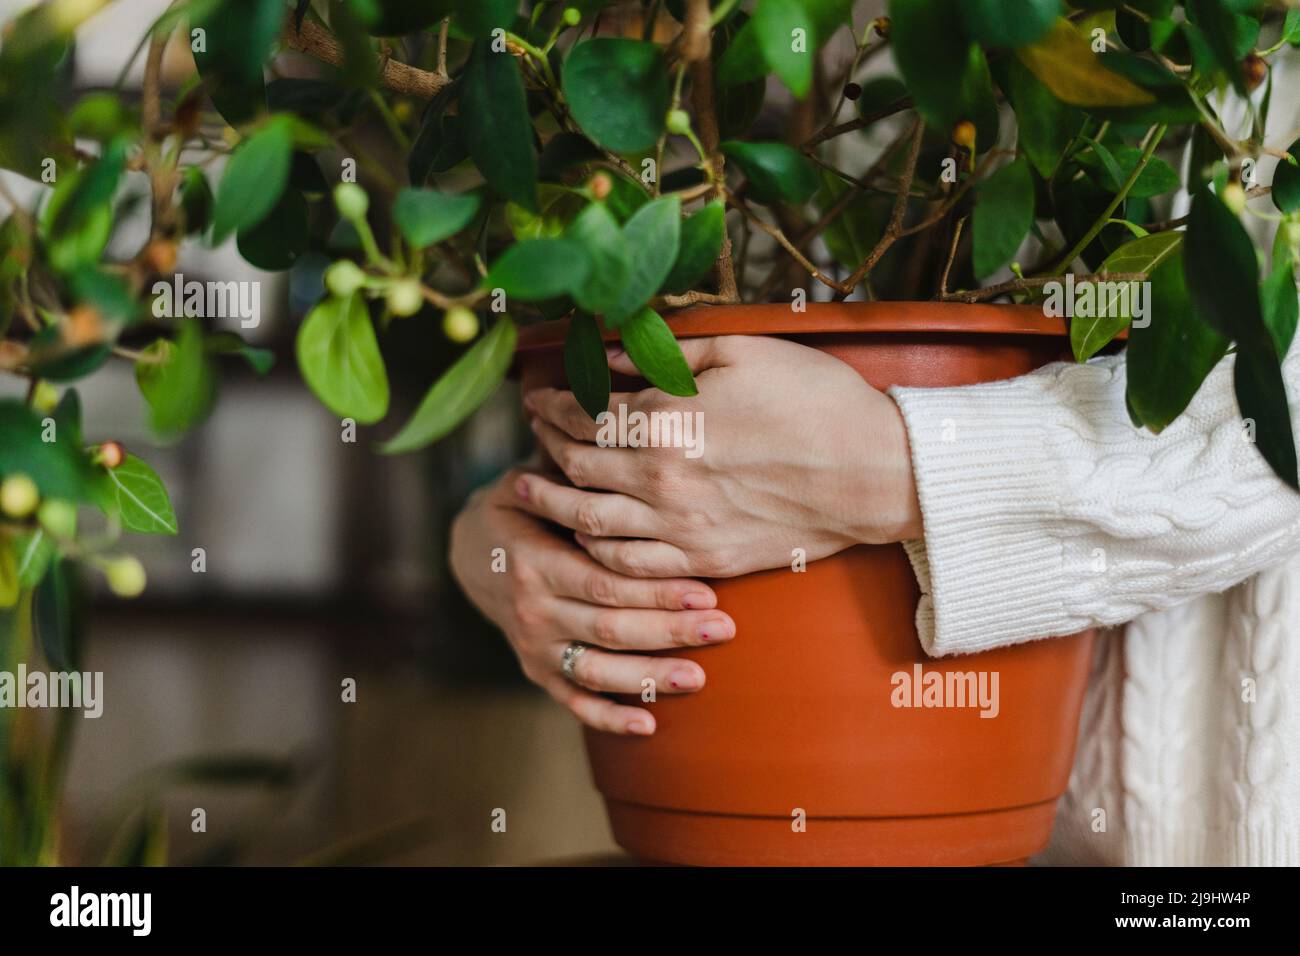 Woman hands embracing potted plant at home Stock Photo